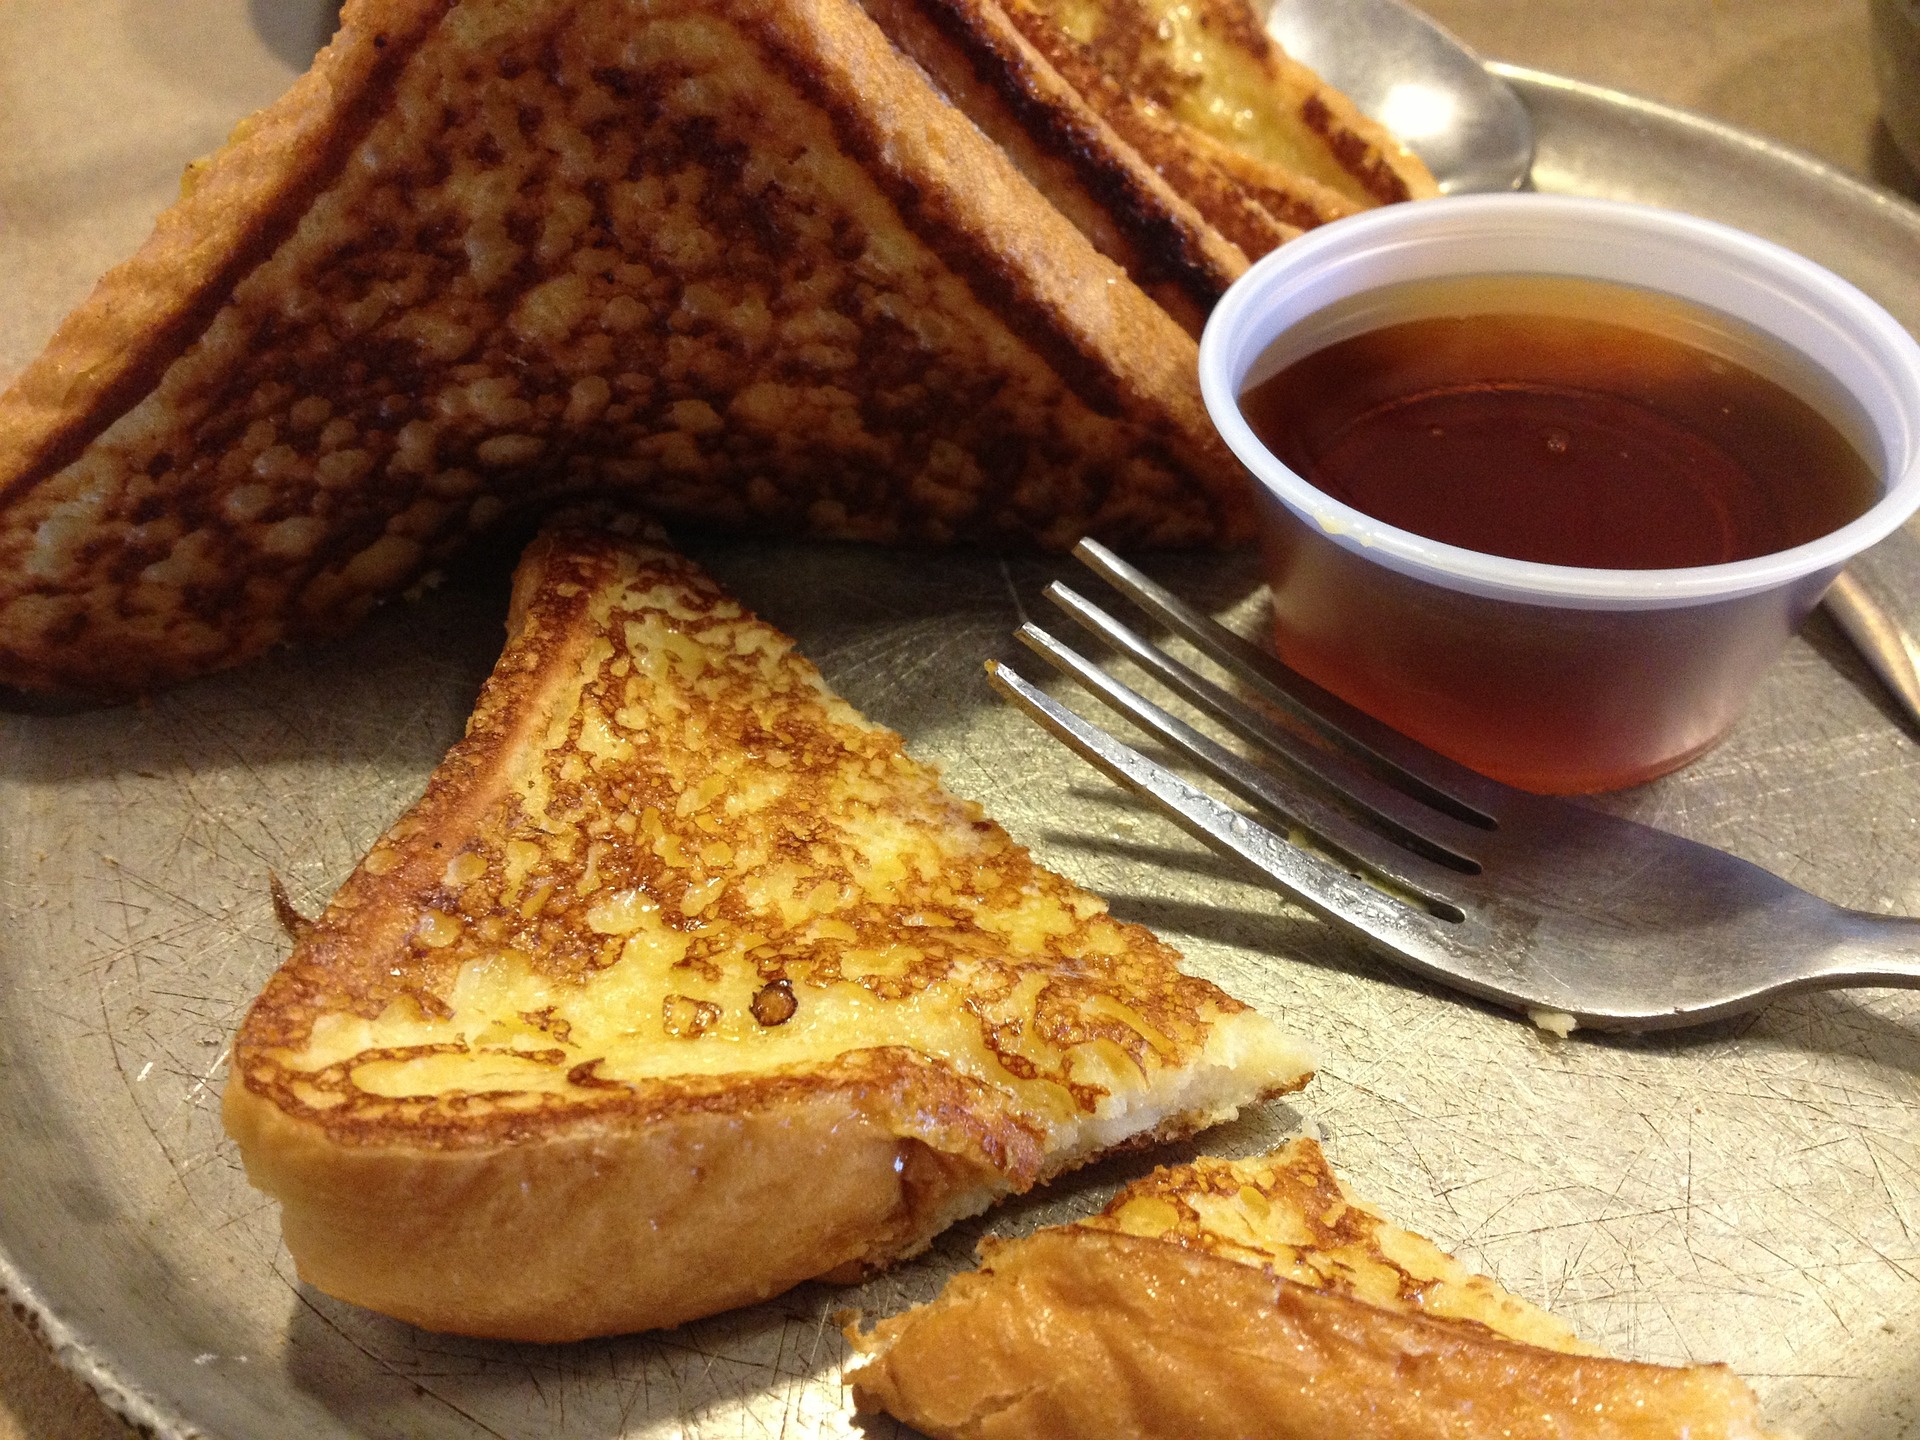 Enjoy French toast and more at The Kneadery